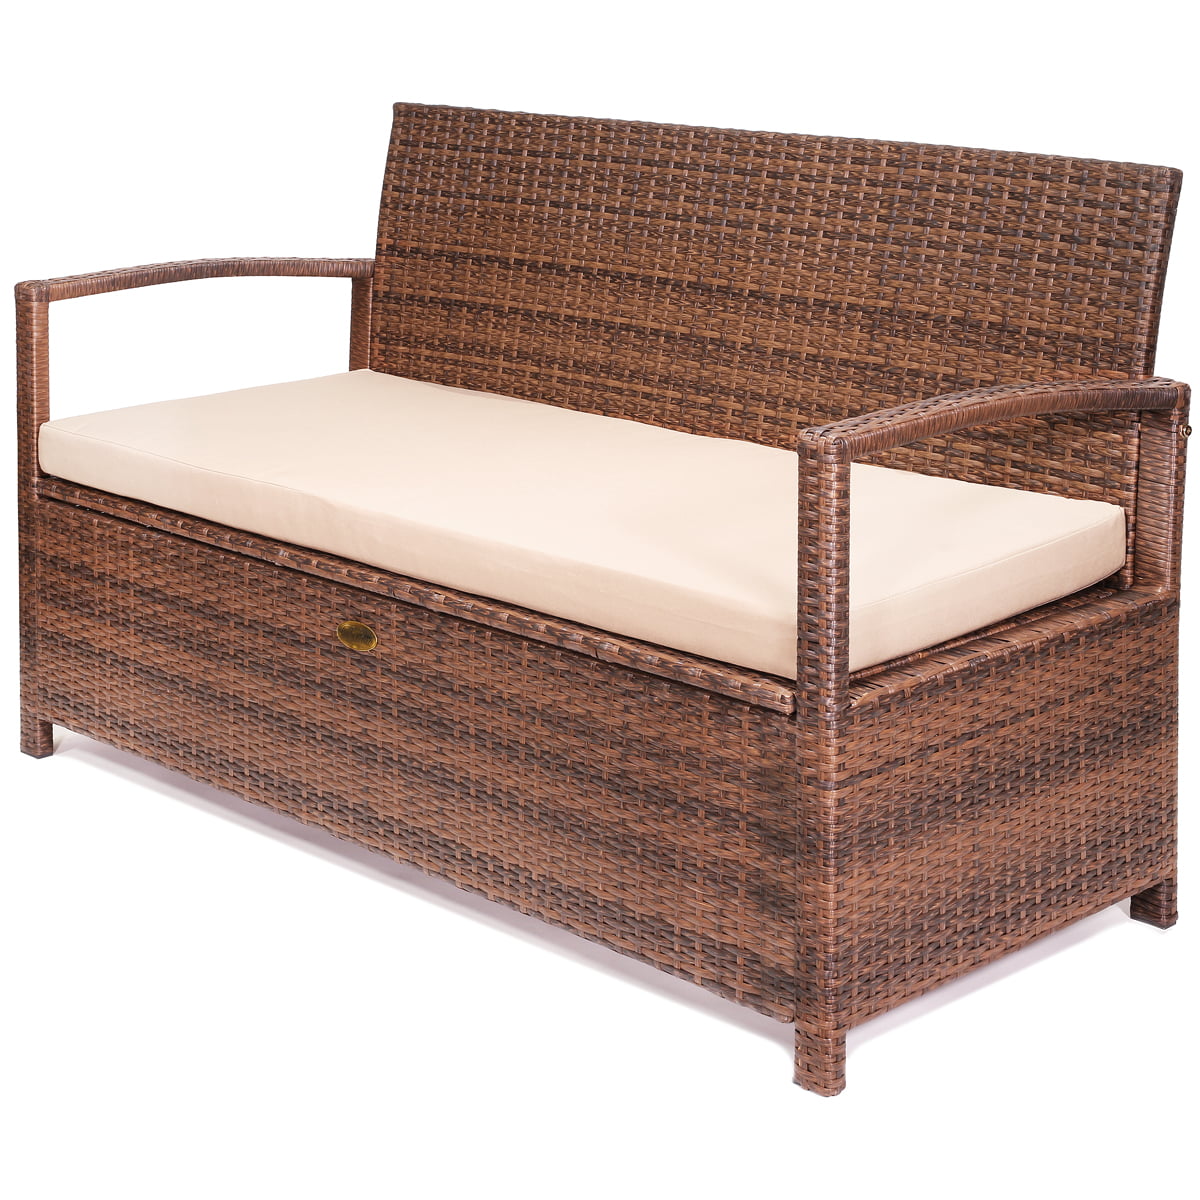 Barton All Weather Deck Box Bench, Outdoor Wicker Storage Bench With Cushion